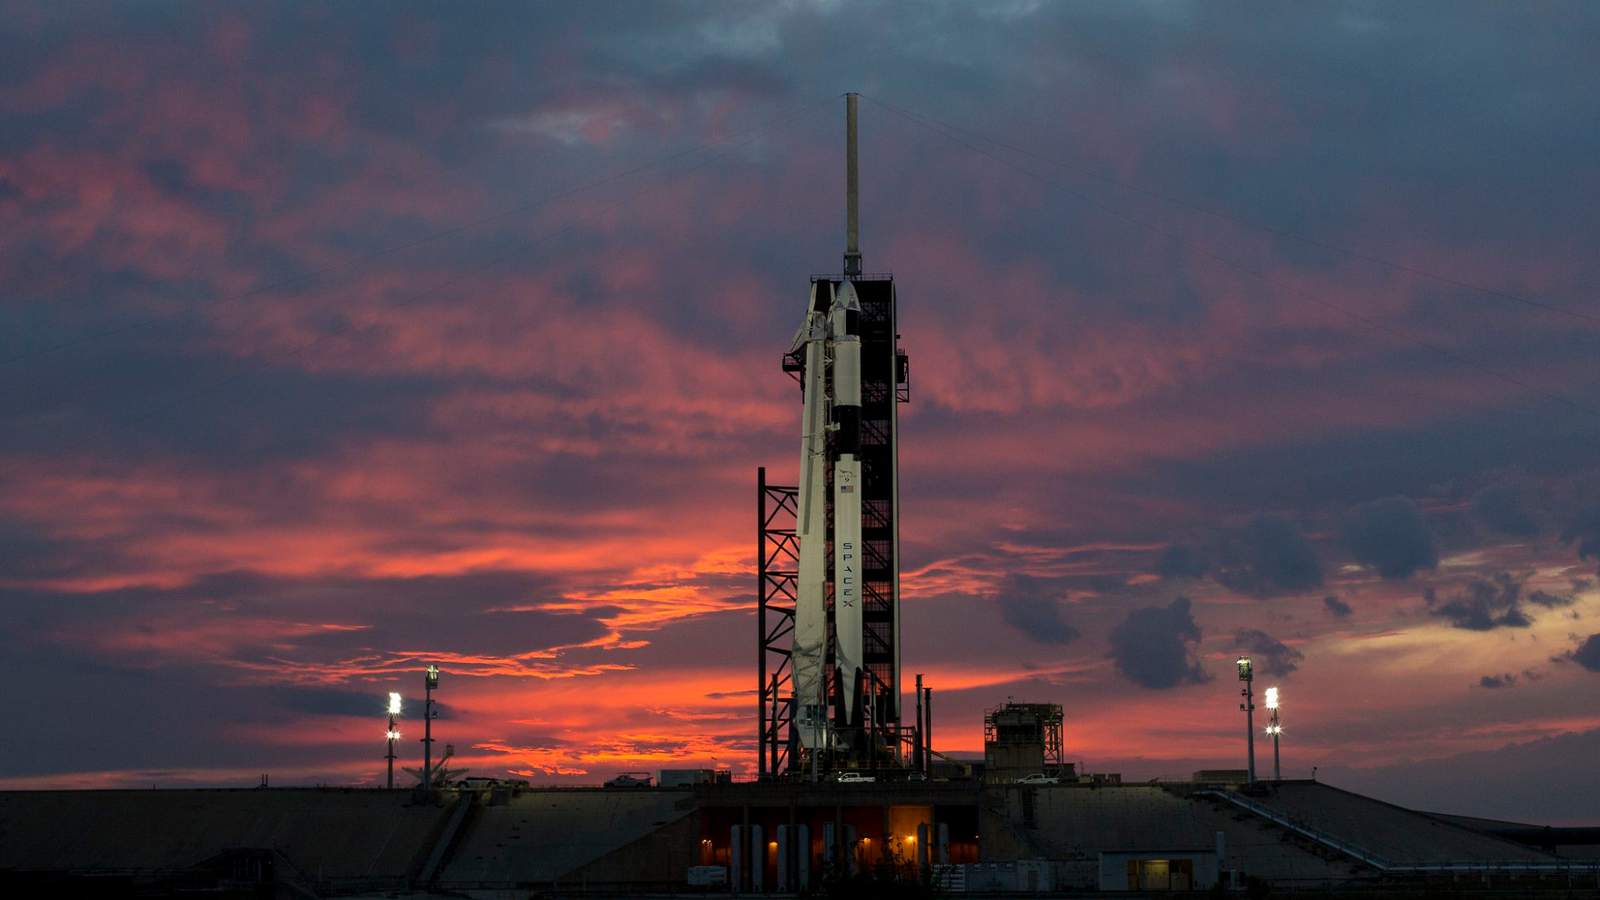 Chance of weather scrub on Crew Dragon astronaut launch day ‘very high,’ SpaceX officials say